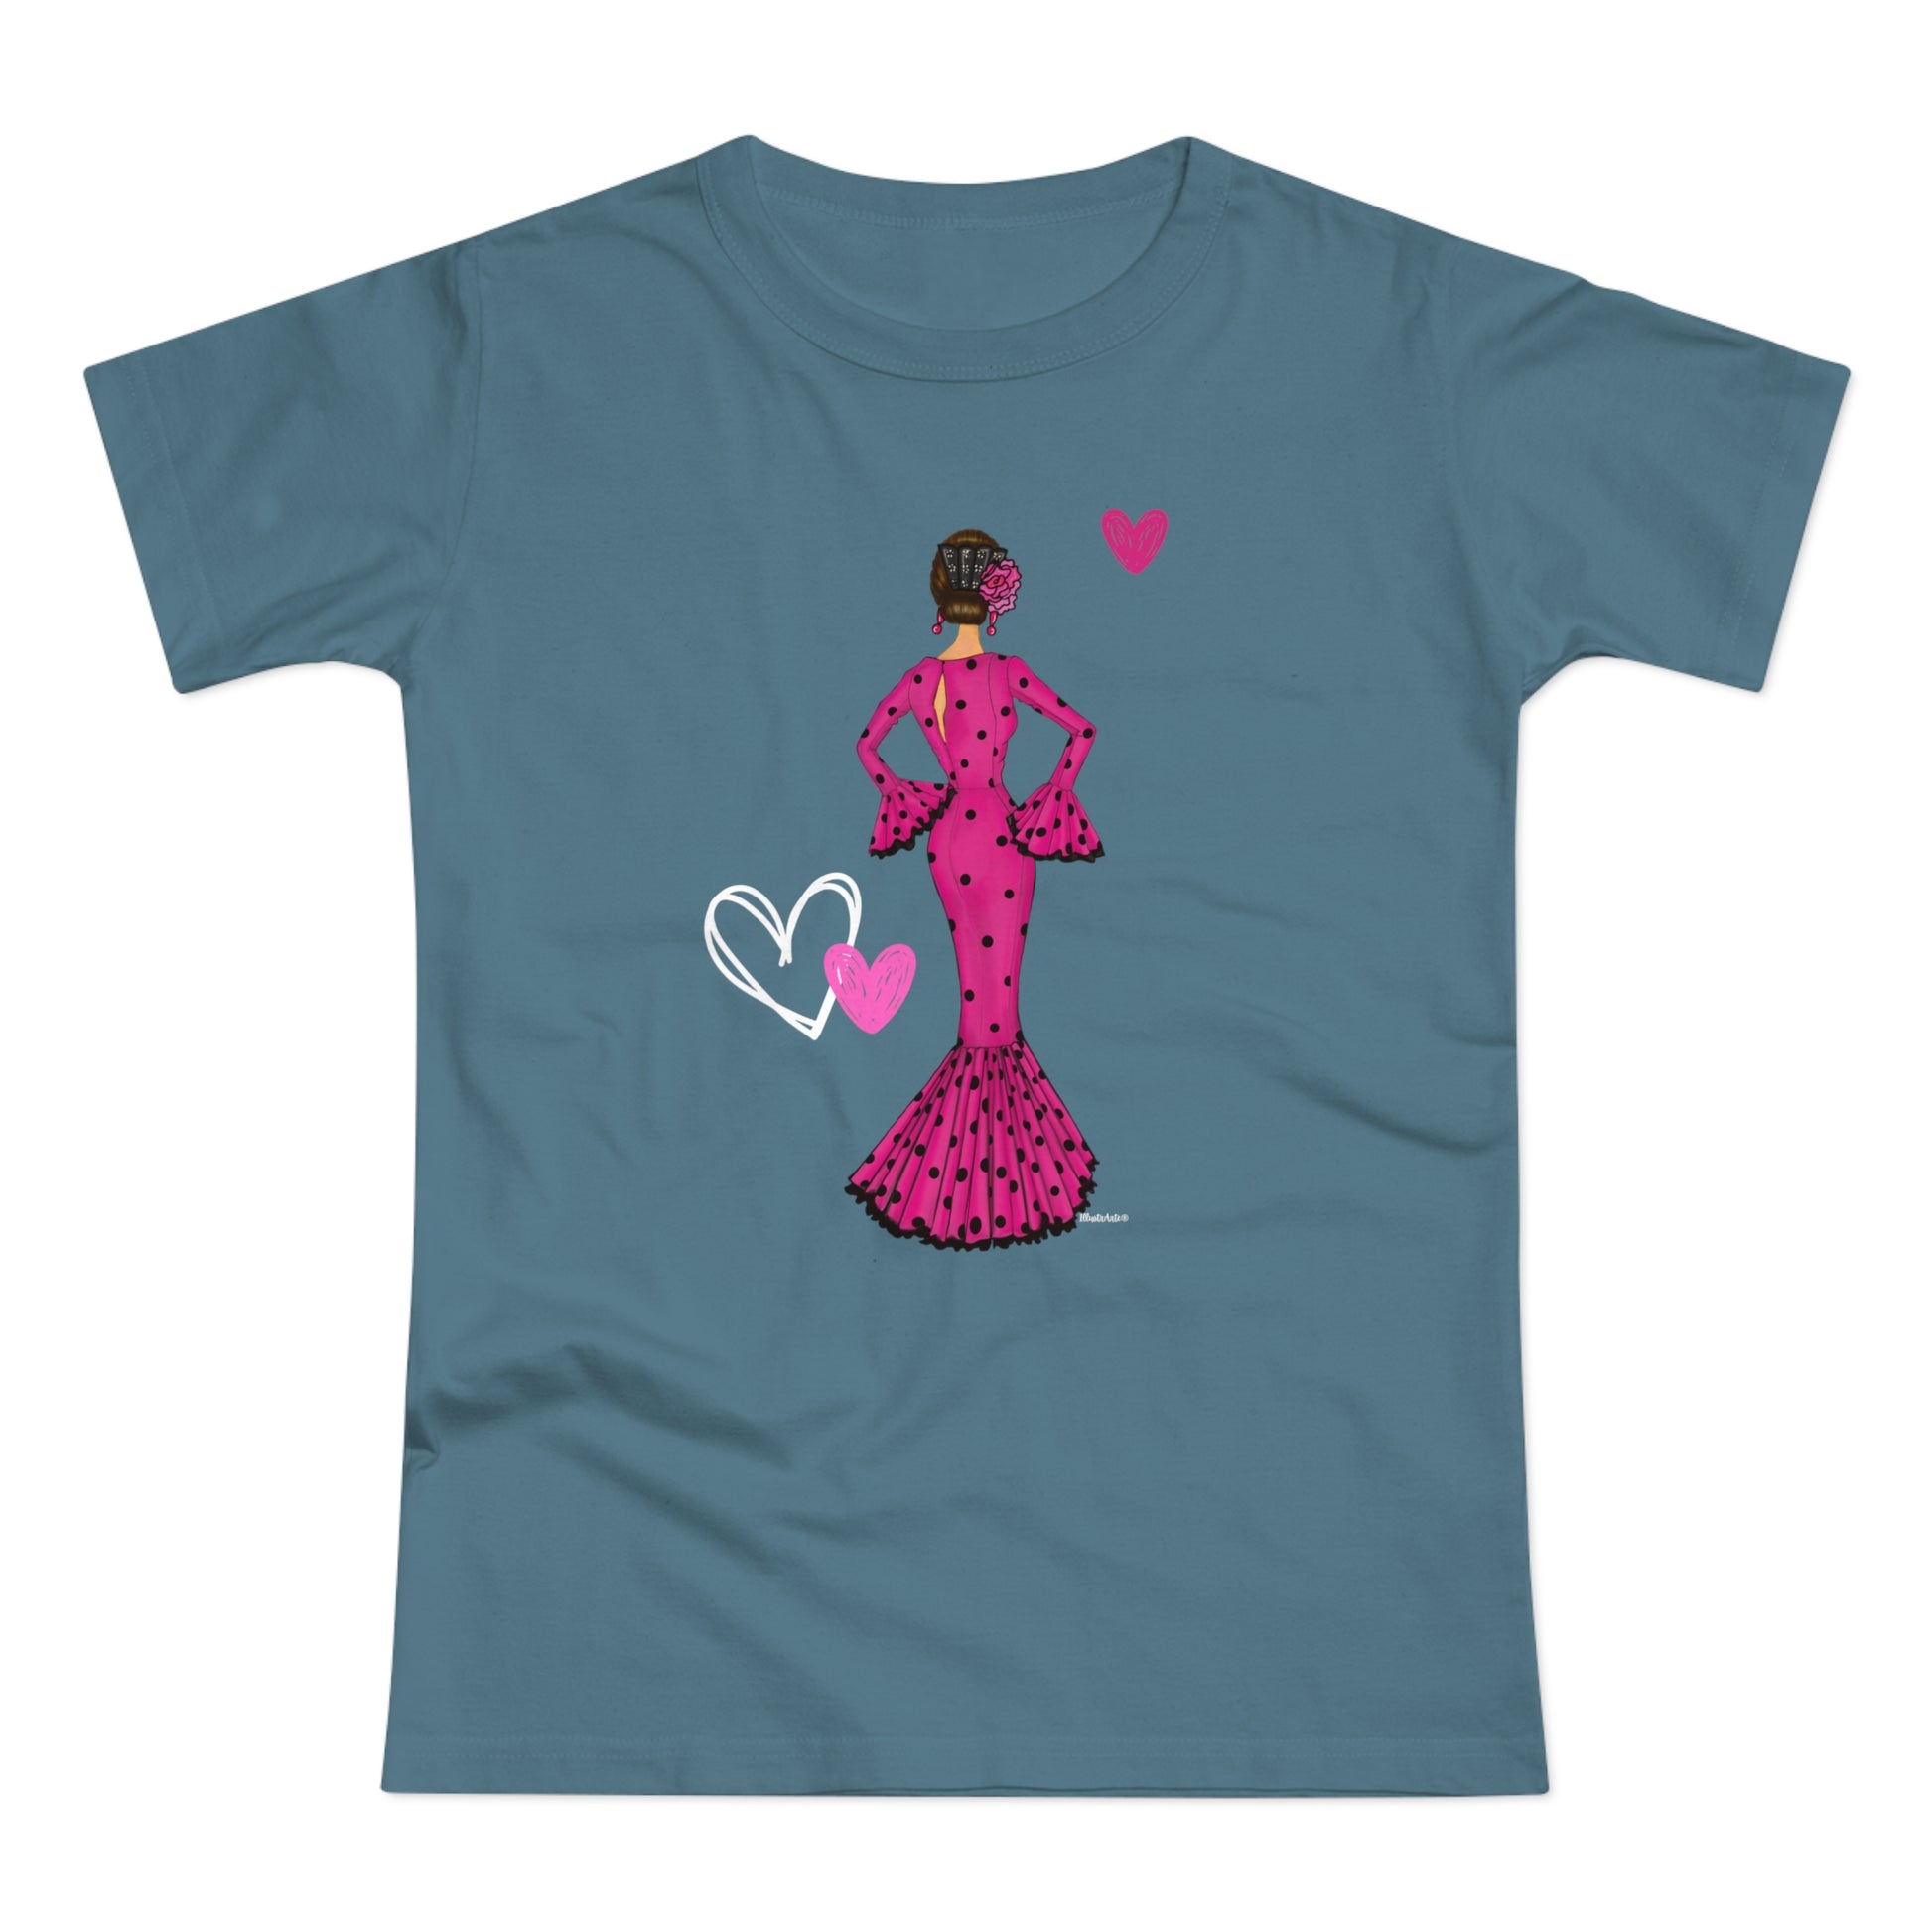 a t - shirt with a woman in a pink dress holding a heart